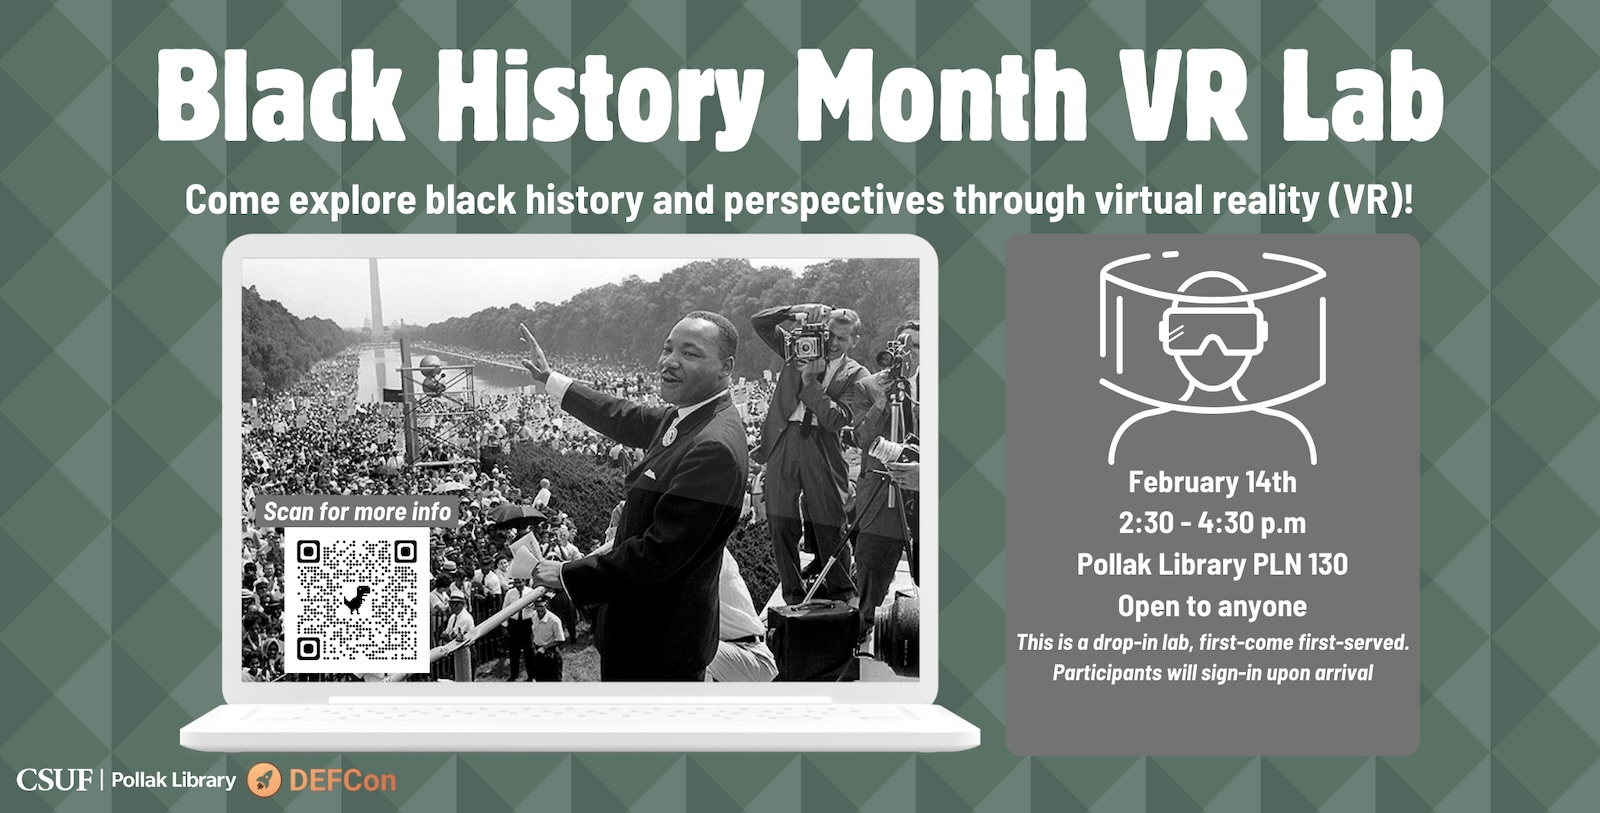 illustration of a laptop with the historical photo of Martin Luther King, Jr. waving over the crowd at the National Mall in the 1963 March on Washington. To the right side, there is an icon of a person wearing virtual reality goggles. The text on the image reads: Black History Month VR Lab: Come explore black history and perspectives through virtual reality (VR)! Feburary 14th, 2:30 to 4:30pm. Pollak Library room PLN 130. Open to anyone. This is a drop-in lab, first-come first-served. Participants will sign-in upon arrival. Sponsored by CSUF Pollak Library and DEF-Con.